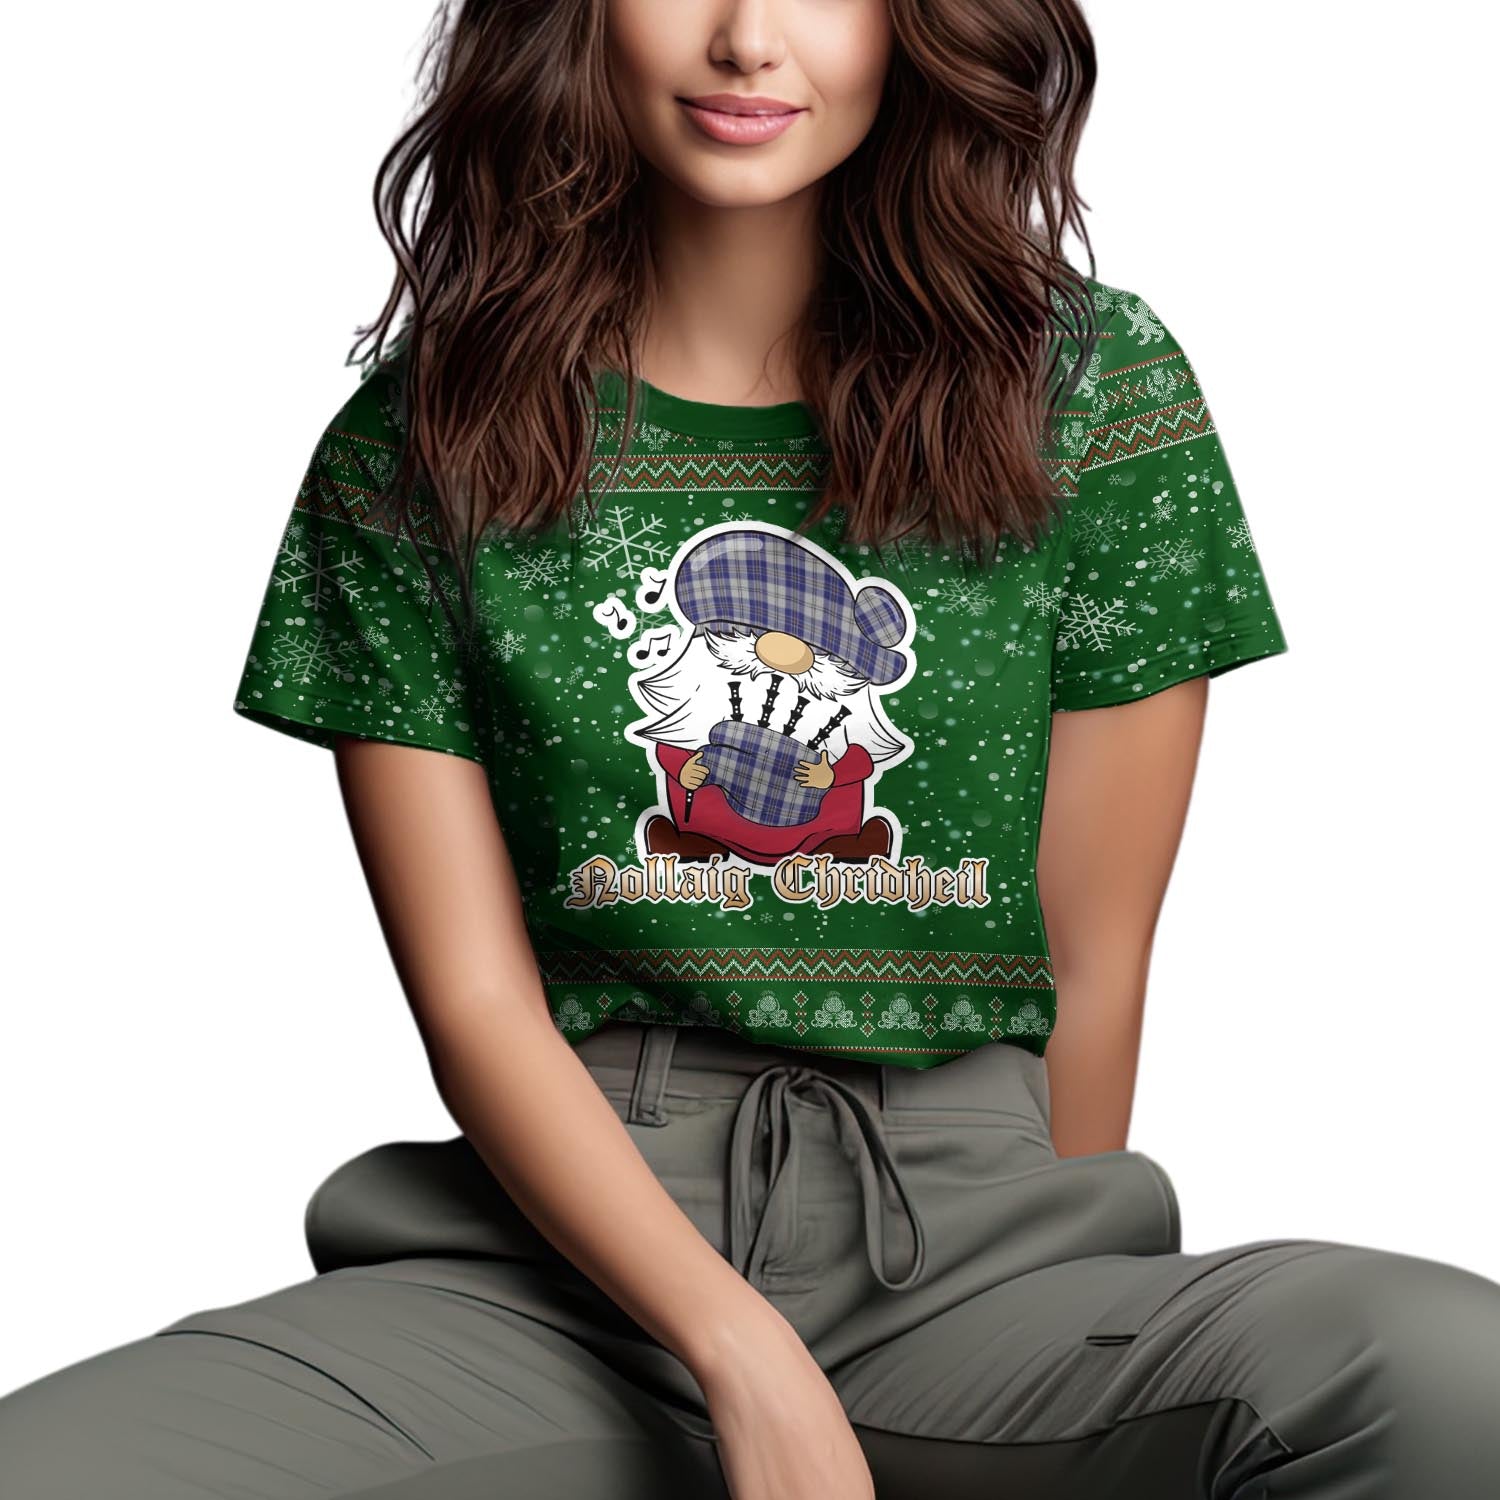 MacPherson Dress Blue Clan Christmas Family T-Shirt with Funny Gnome Playing Bagpipes Women's Shirt Green - Tartanvibesclothing